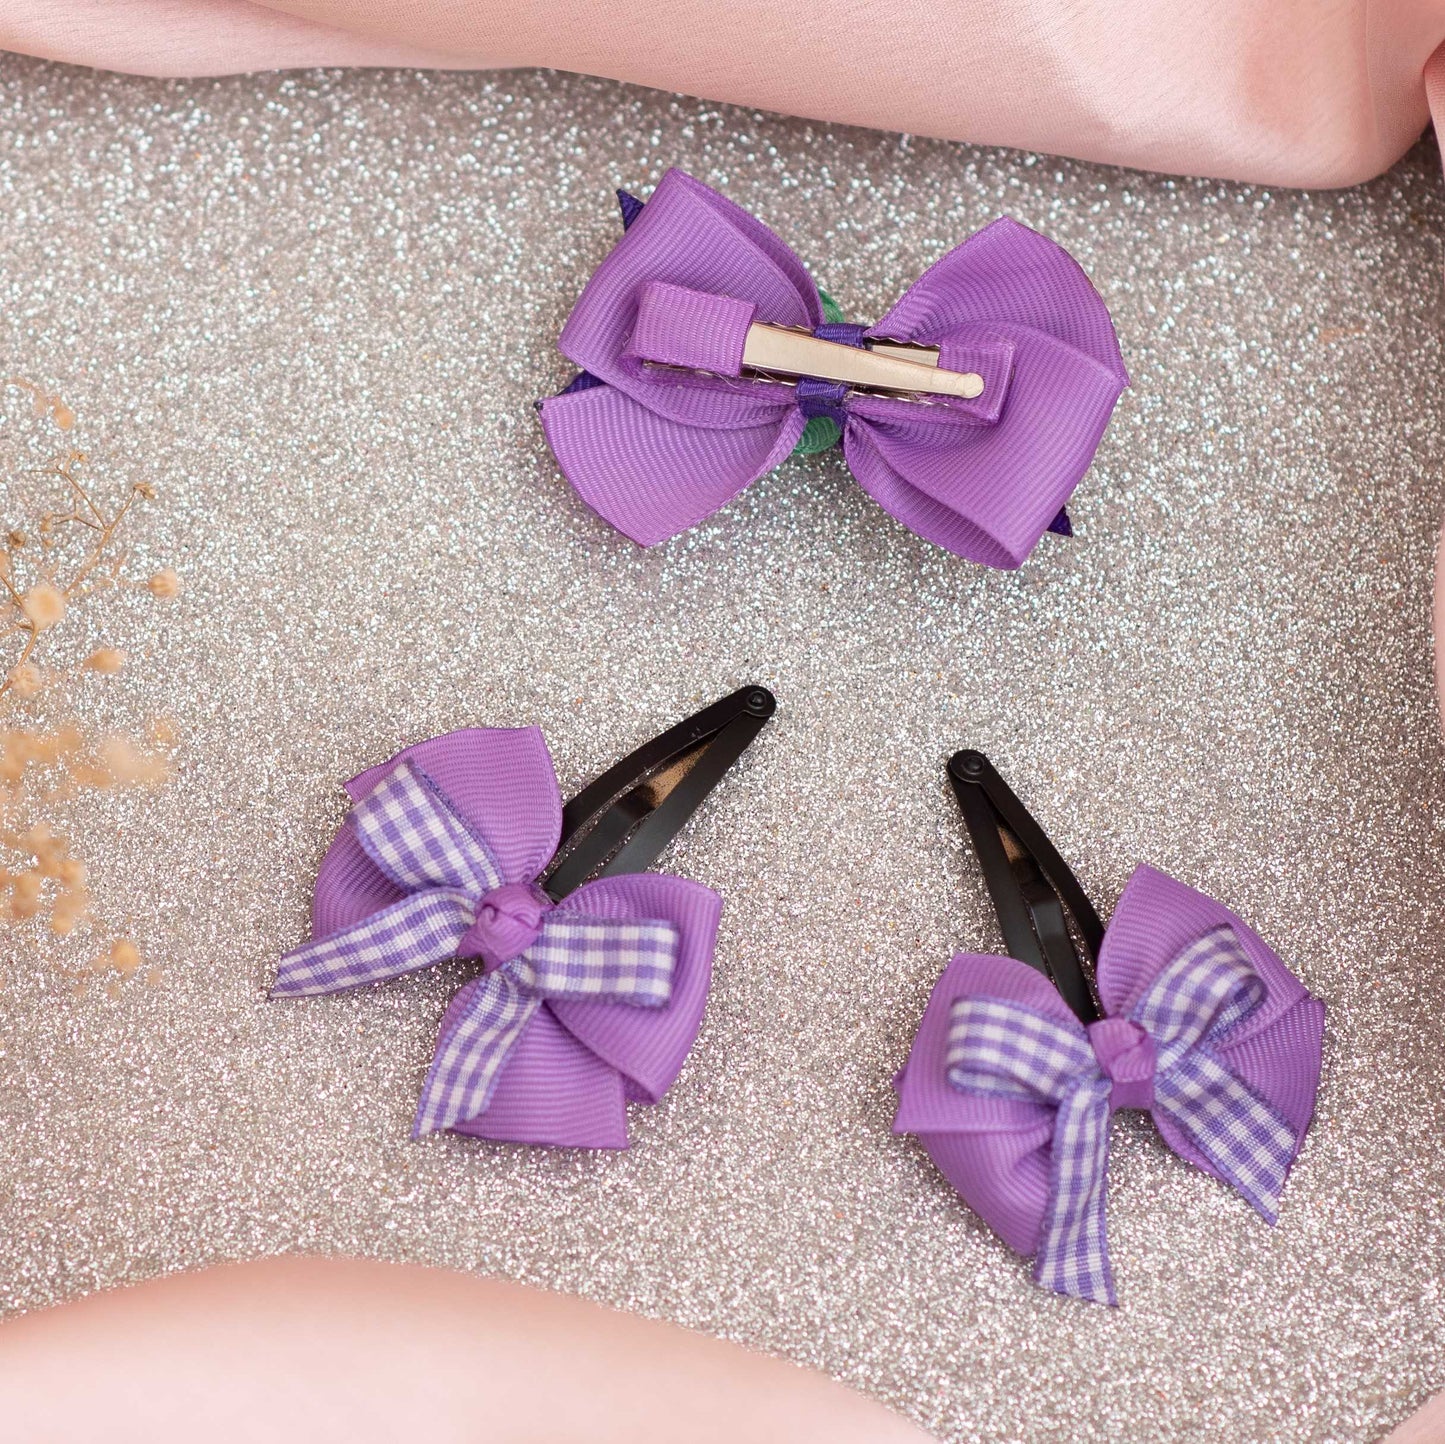 Combo: Fancy bow with felt roses and pearls on alligator clip and dual bow on tic-tac pins - Purple  (Set of 1 pair, 1 single bow - 3 quantity)